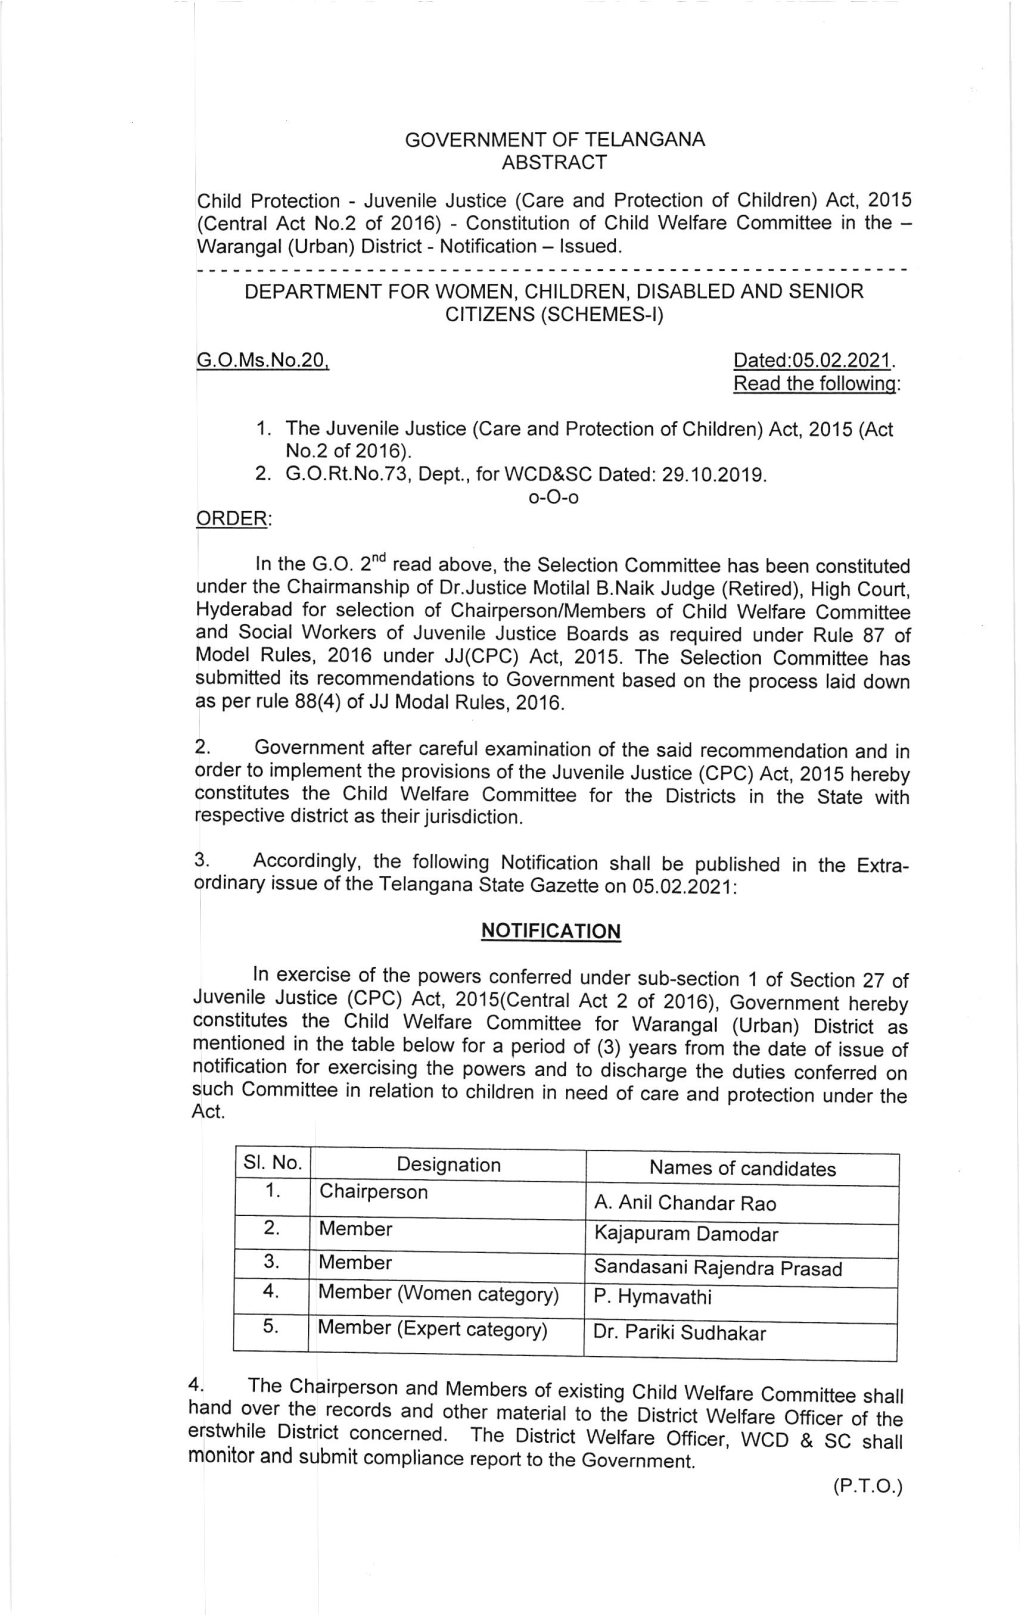 Constitutes the Child Welfare Committee for the Districts in the State with I